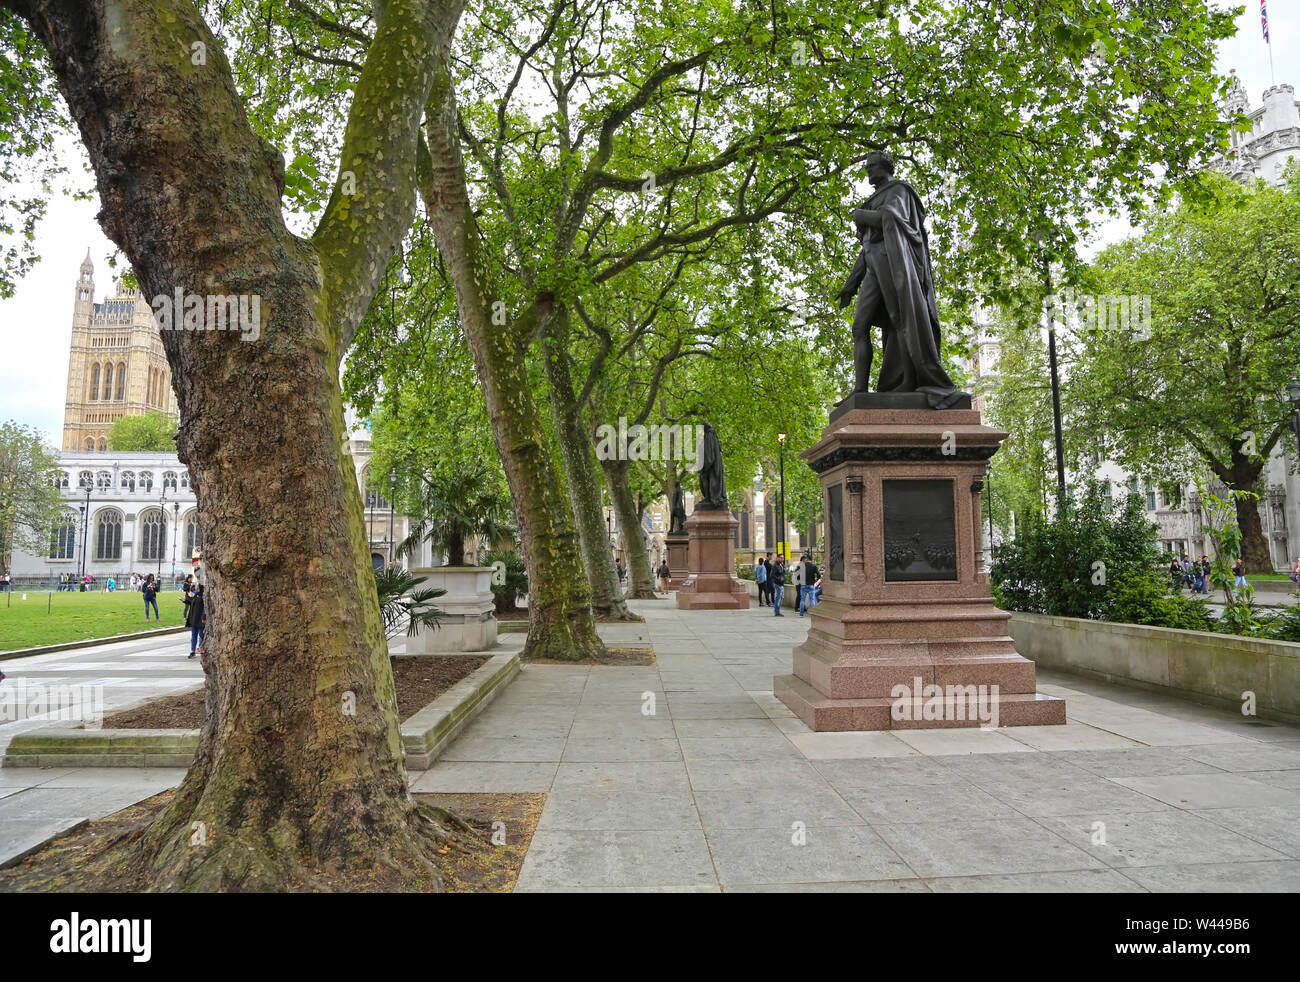 London, Great Britain -May 22, 2016: statues to Edward Geoffrey Smith Stanley and Benjamin Disraeli  in the Parliament Square Stock Photo